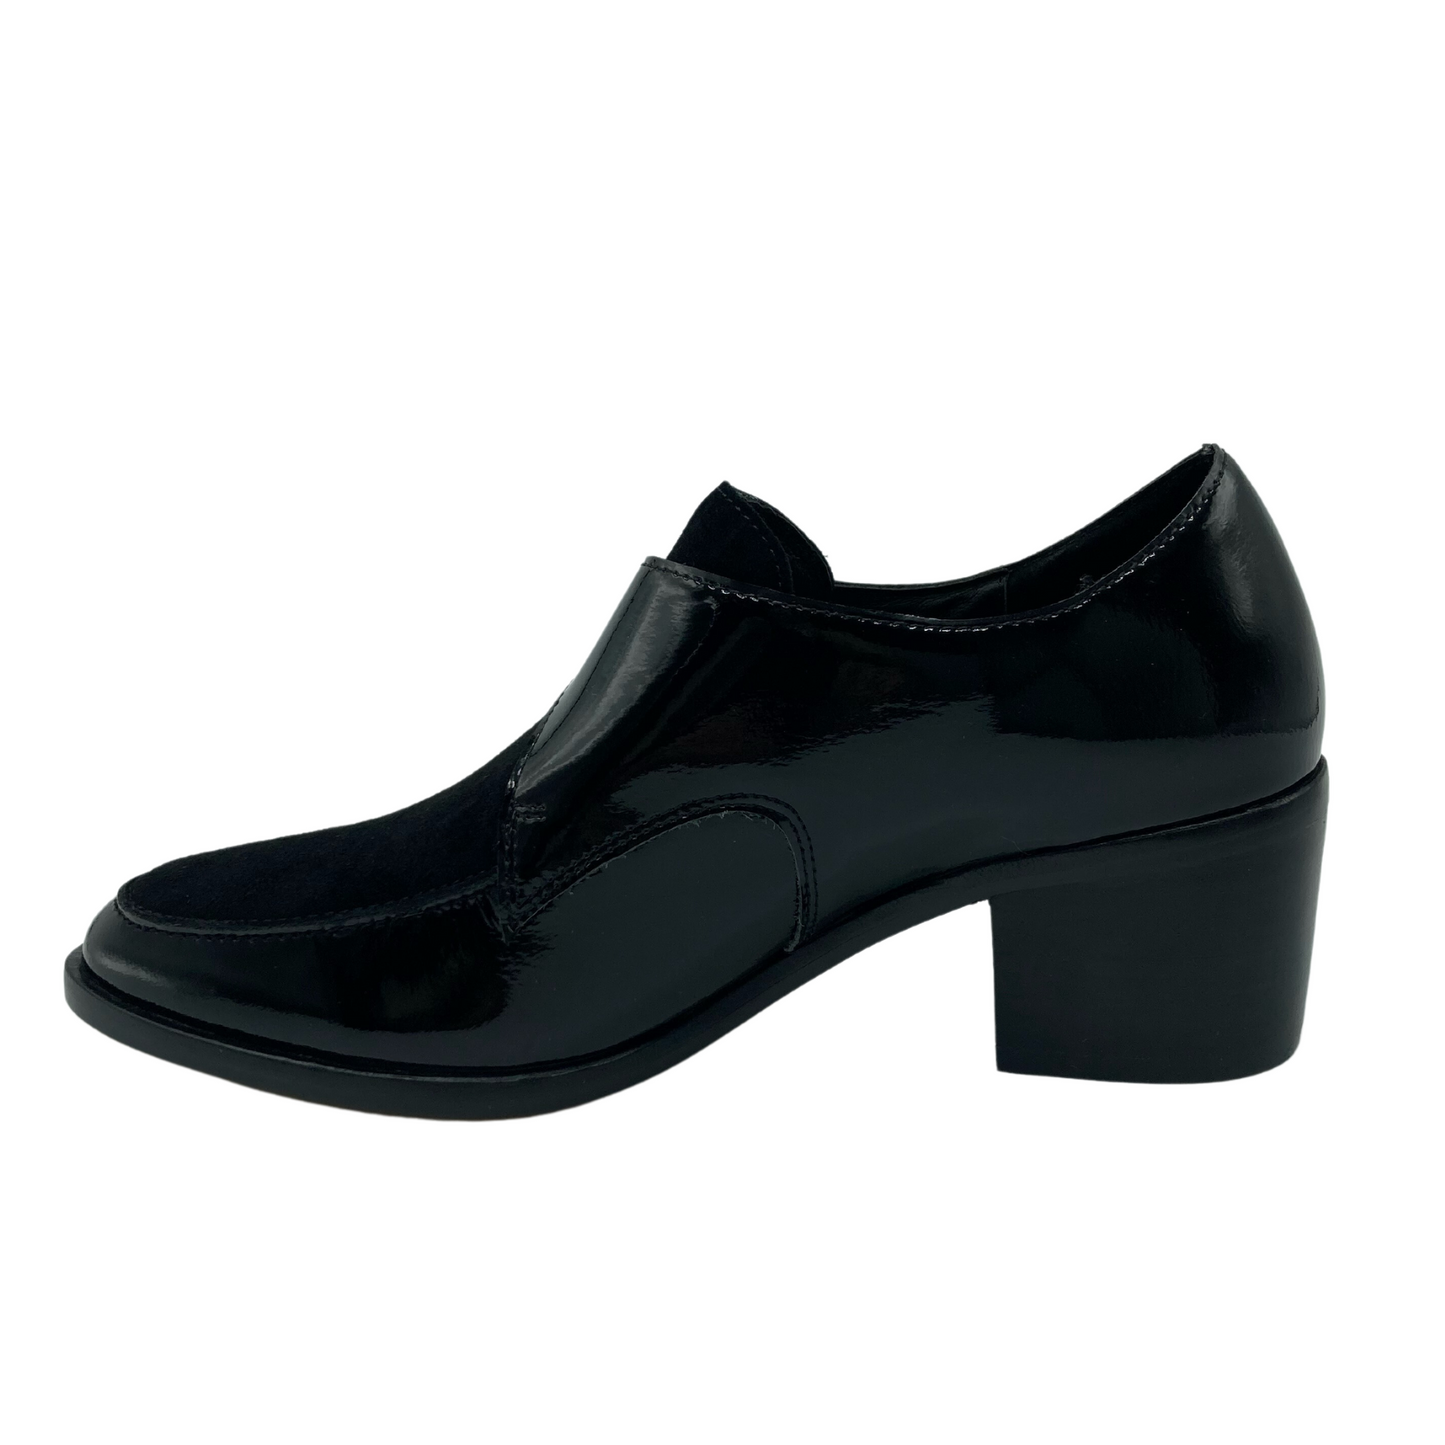 Left facing view of block heeled, black leather loafer